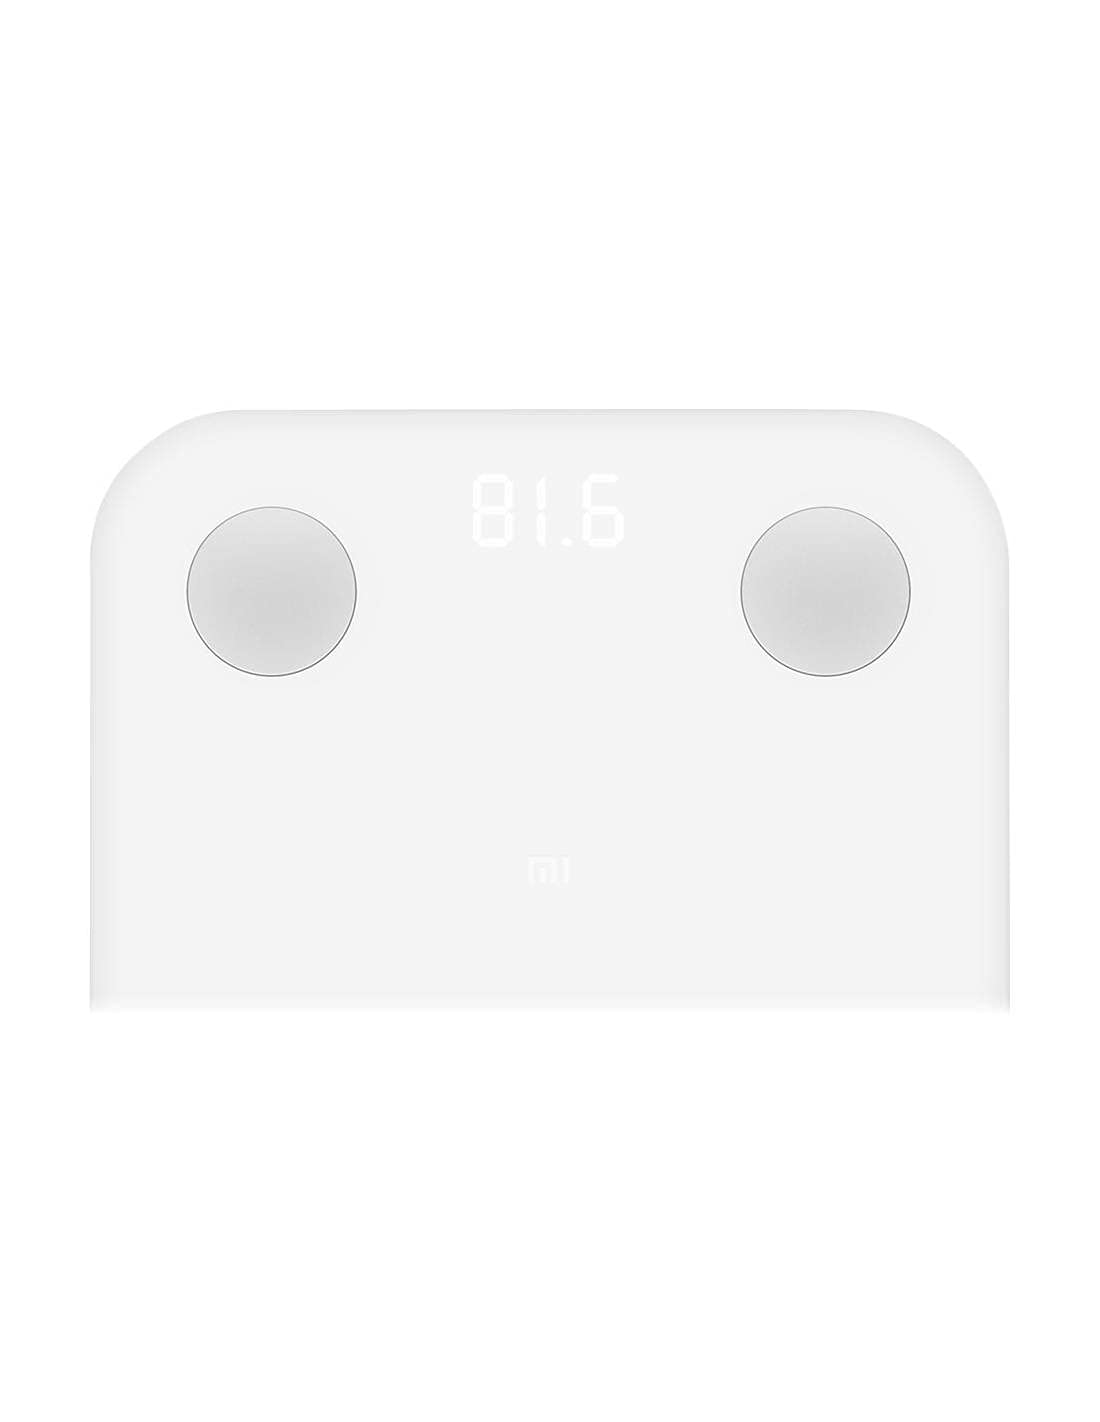 Xiaomi Mi Body Composition Scale 2 Smart Fat Weight Health Scale Bt 5.0 Balance Test 13 Body Date Bmi Weight Scale Led Digital Display Mi Fit App Data Analysis